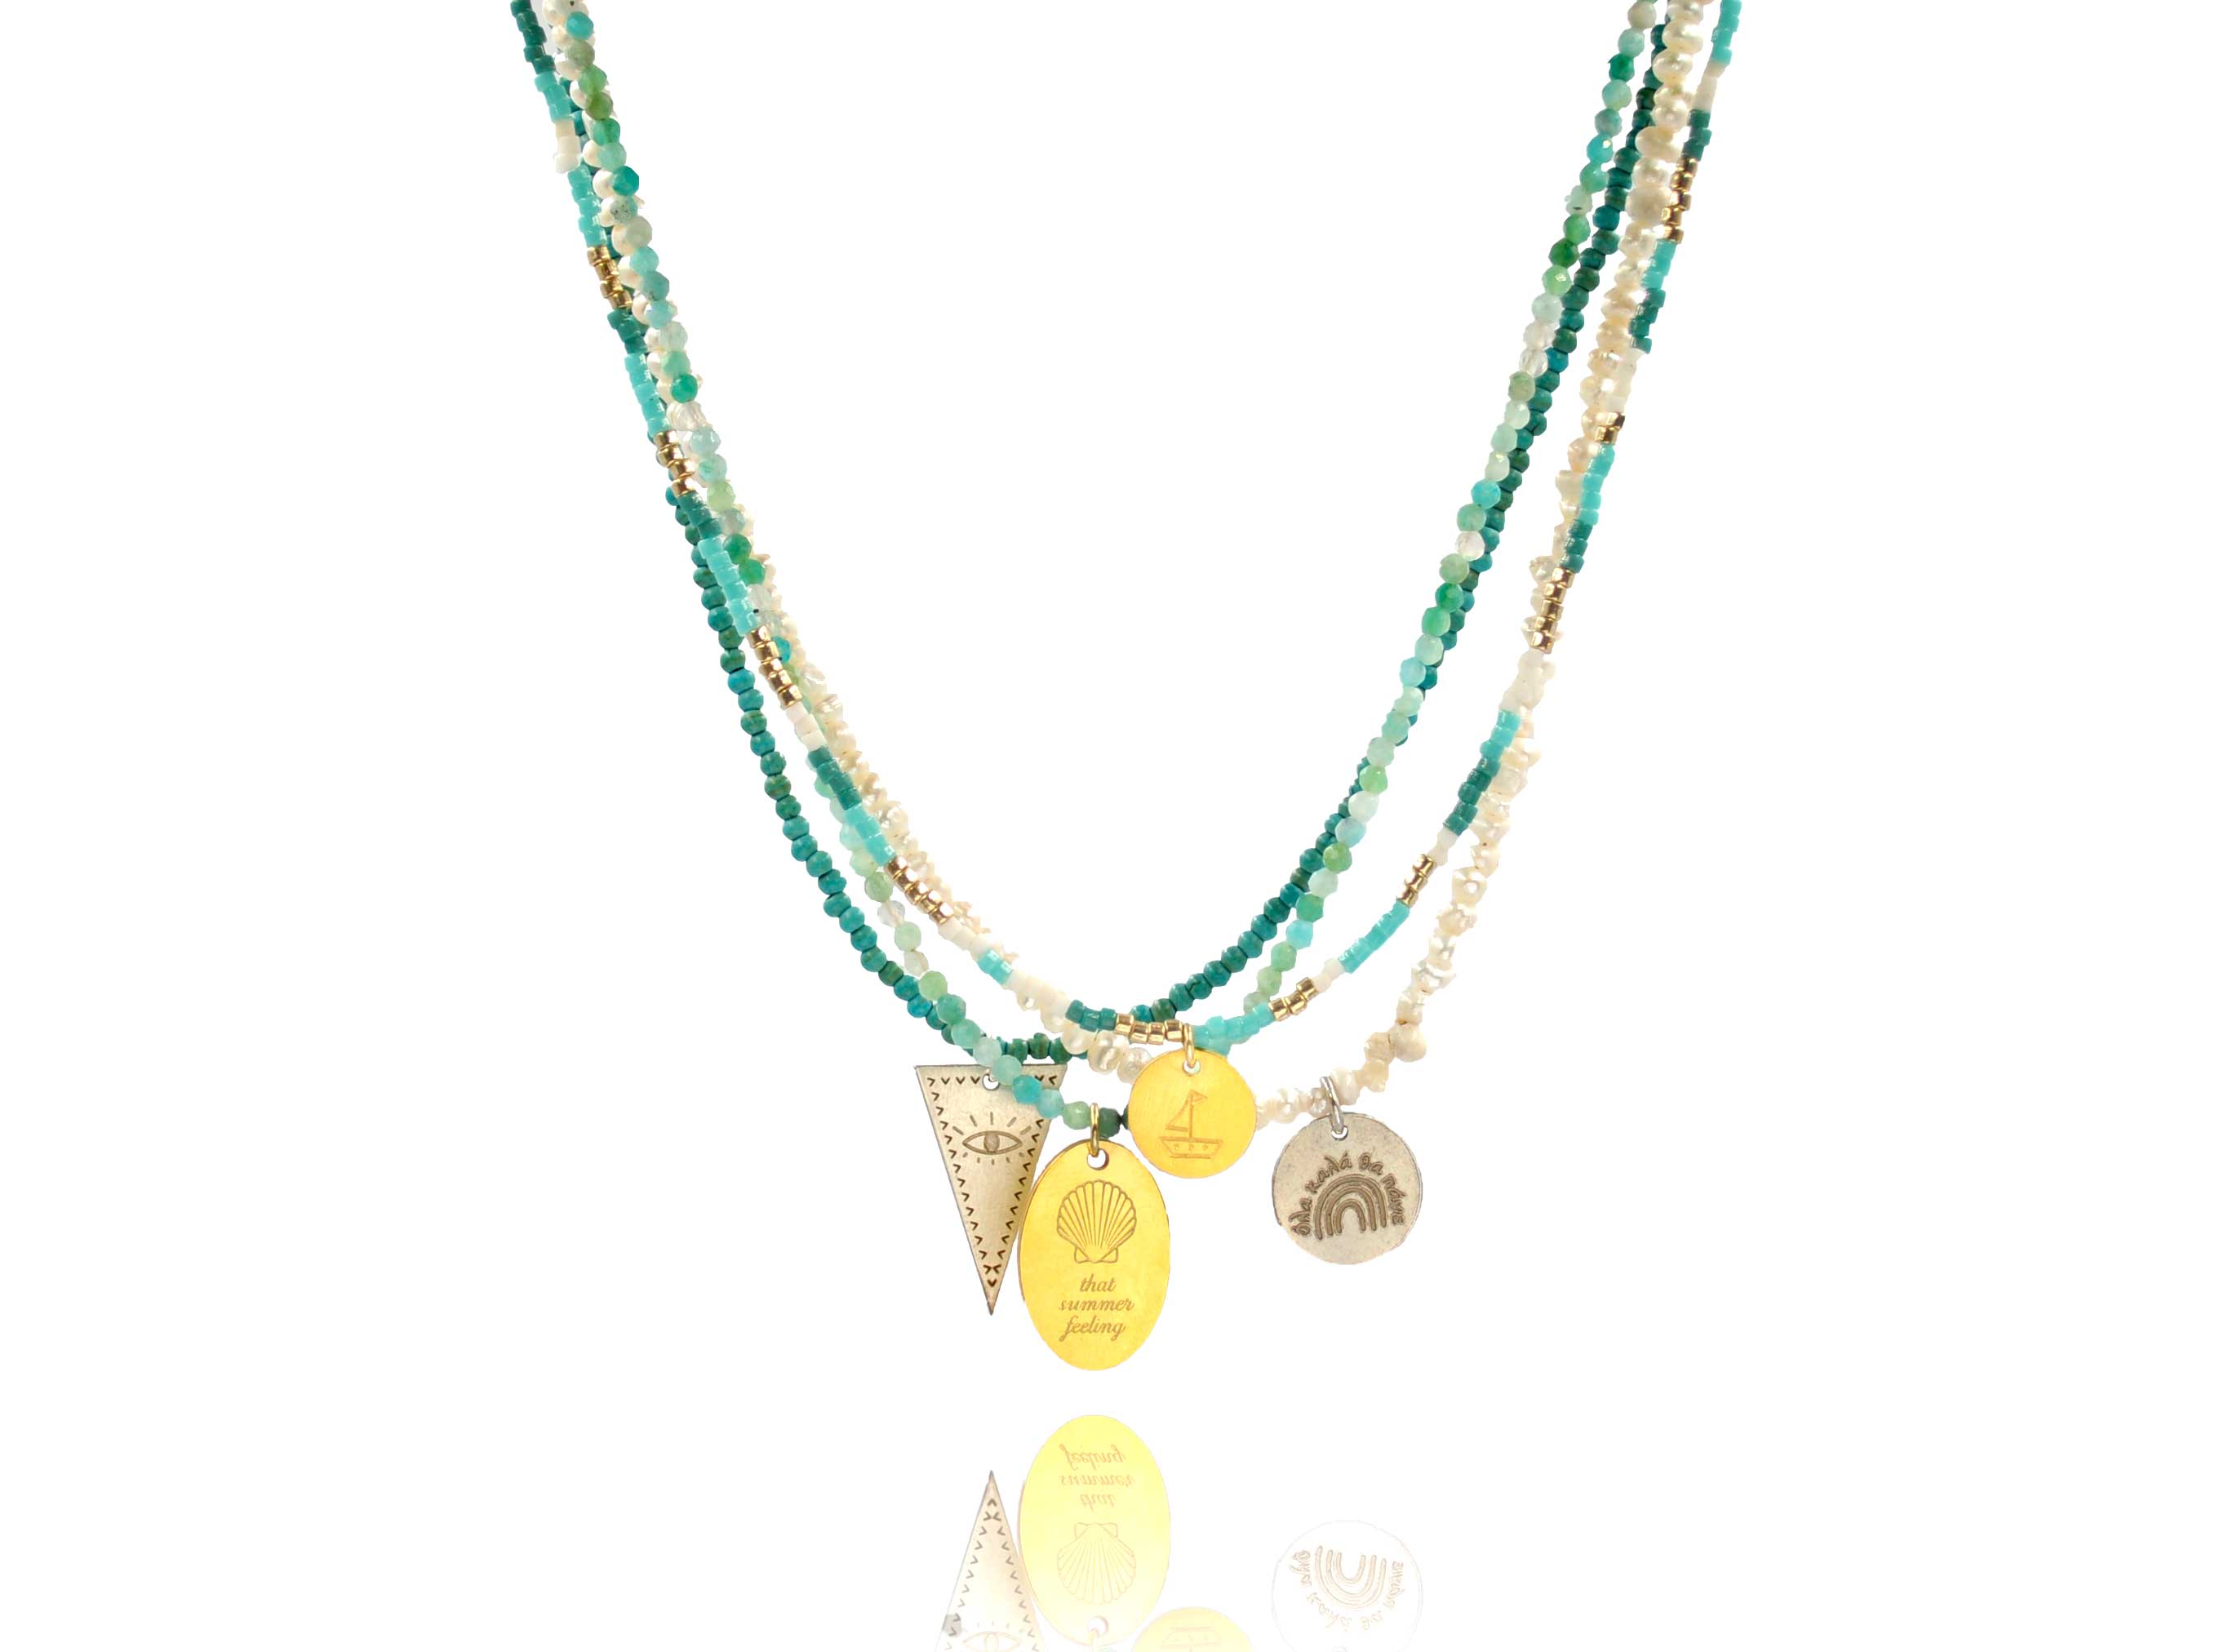 A combo of 4 different necklaces made of gemstones, japanese miyuki beads, crystal and white pearls combined with silver 925 charms with different designs - eye, boat -. and messages like ´´ that summer feeling´´ and ´´όλα καλά θα πάνε''.